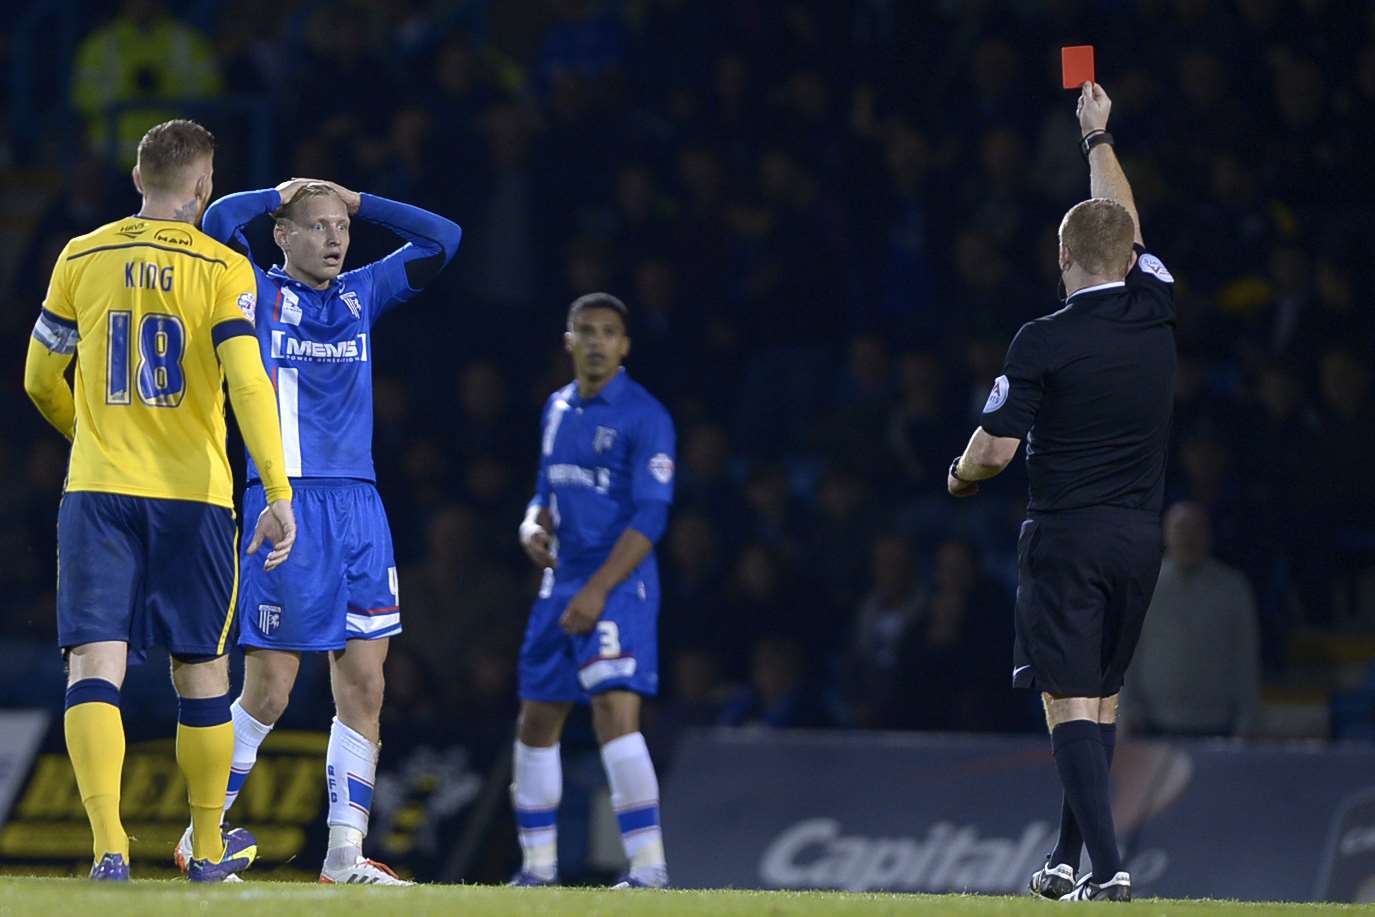 Josh Wright can't believe it. He is sent off by referee Lee Swabey. Picture: Barry Goodwin